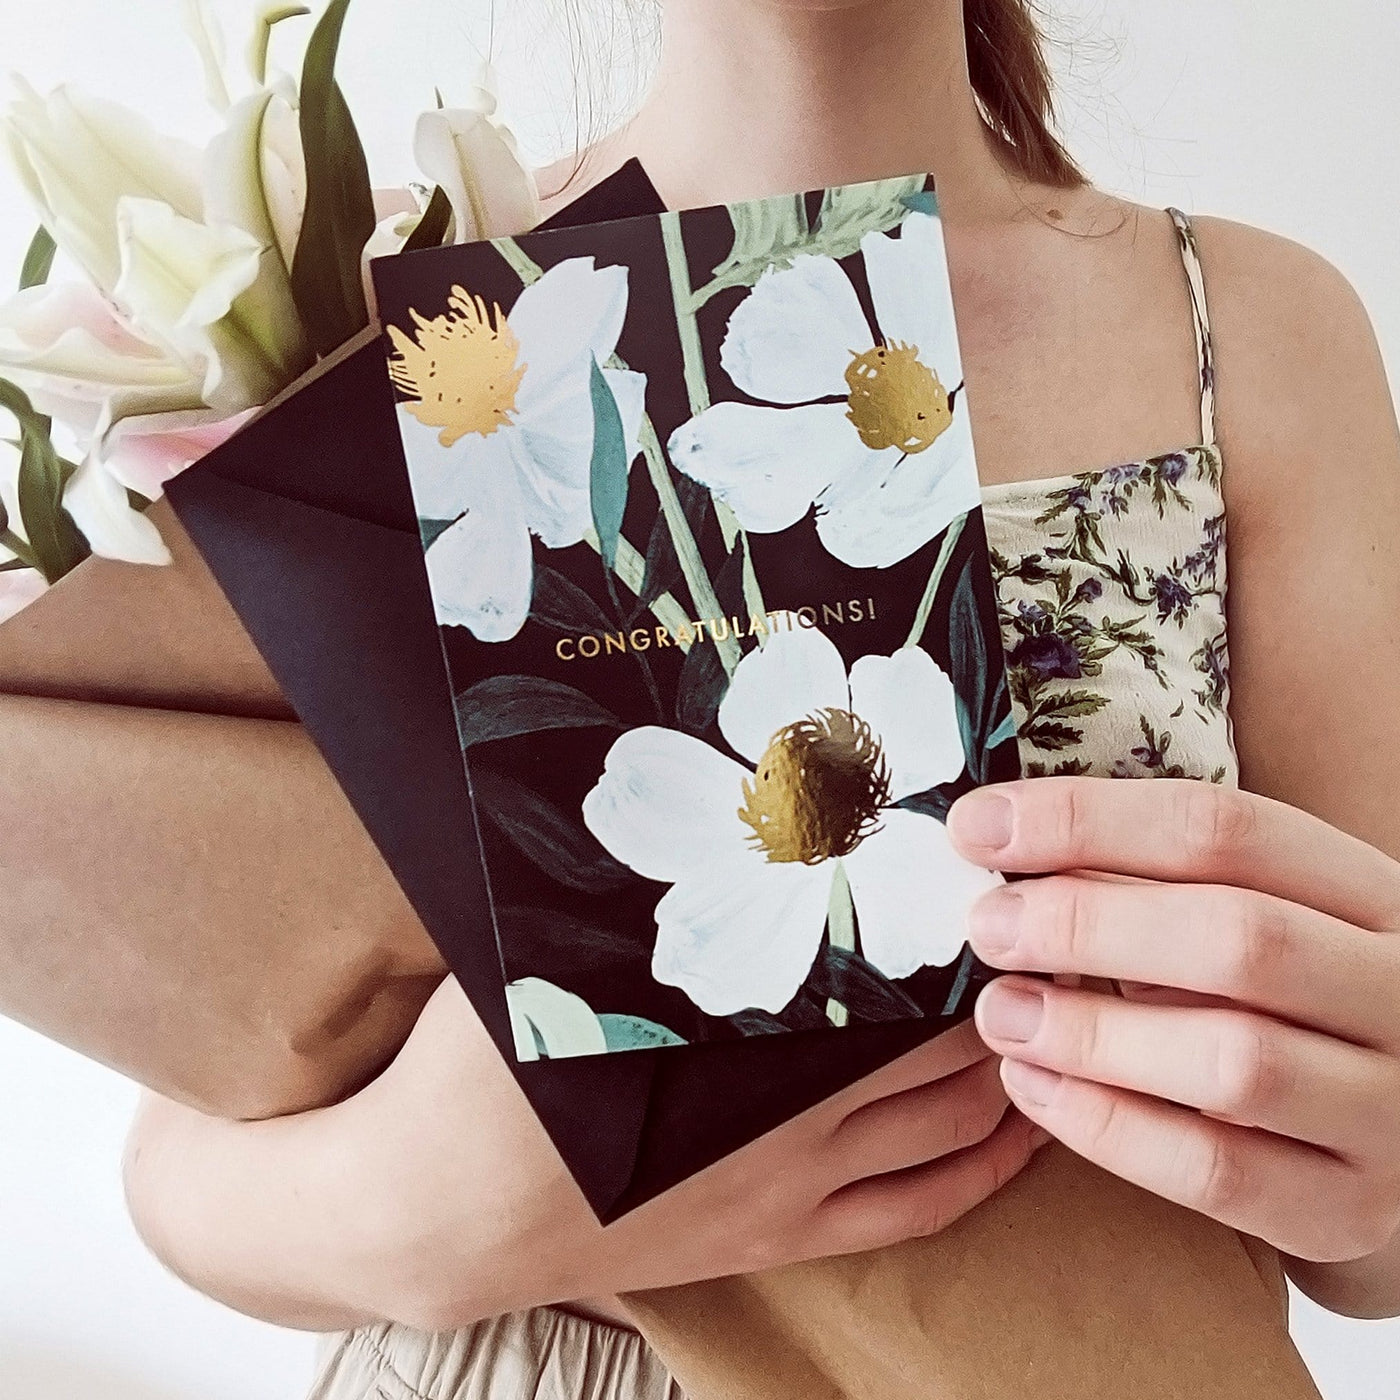 Girl Holding Illustrated White Flowers With Teal Leaves and Gold Centres On A Black Card With Congratulations In Gold With A Black Envelope - Annie Dornan Smith